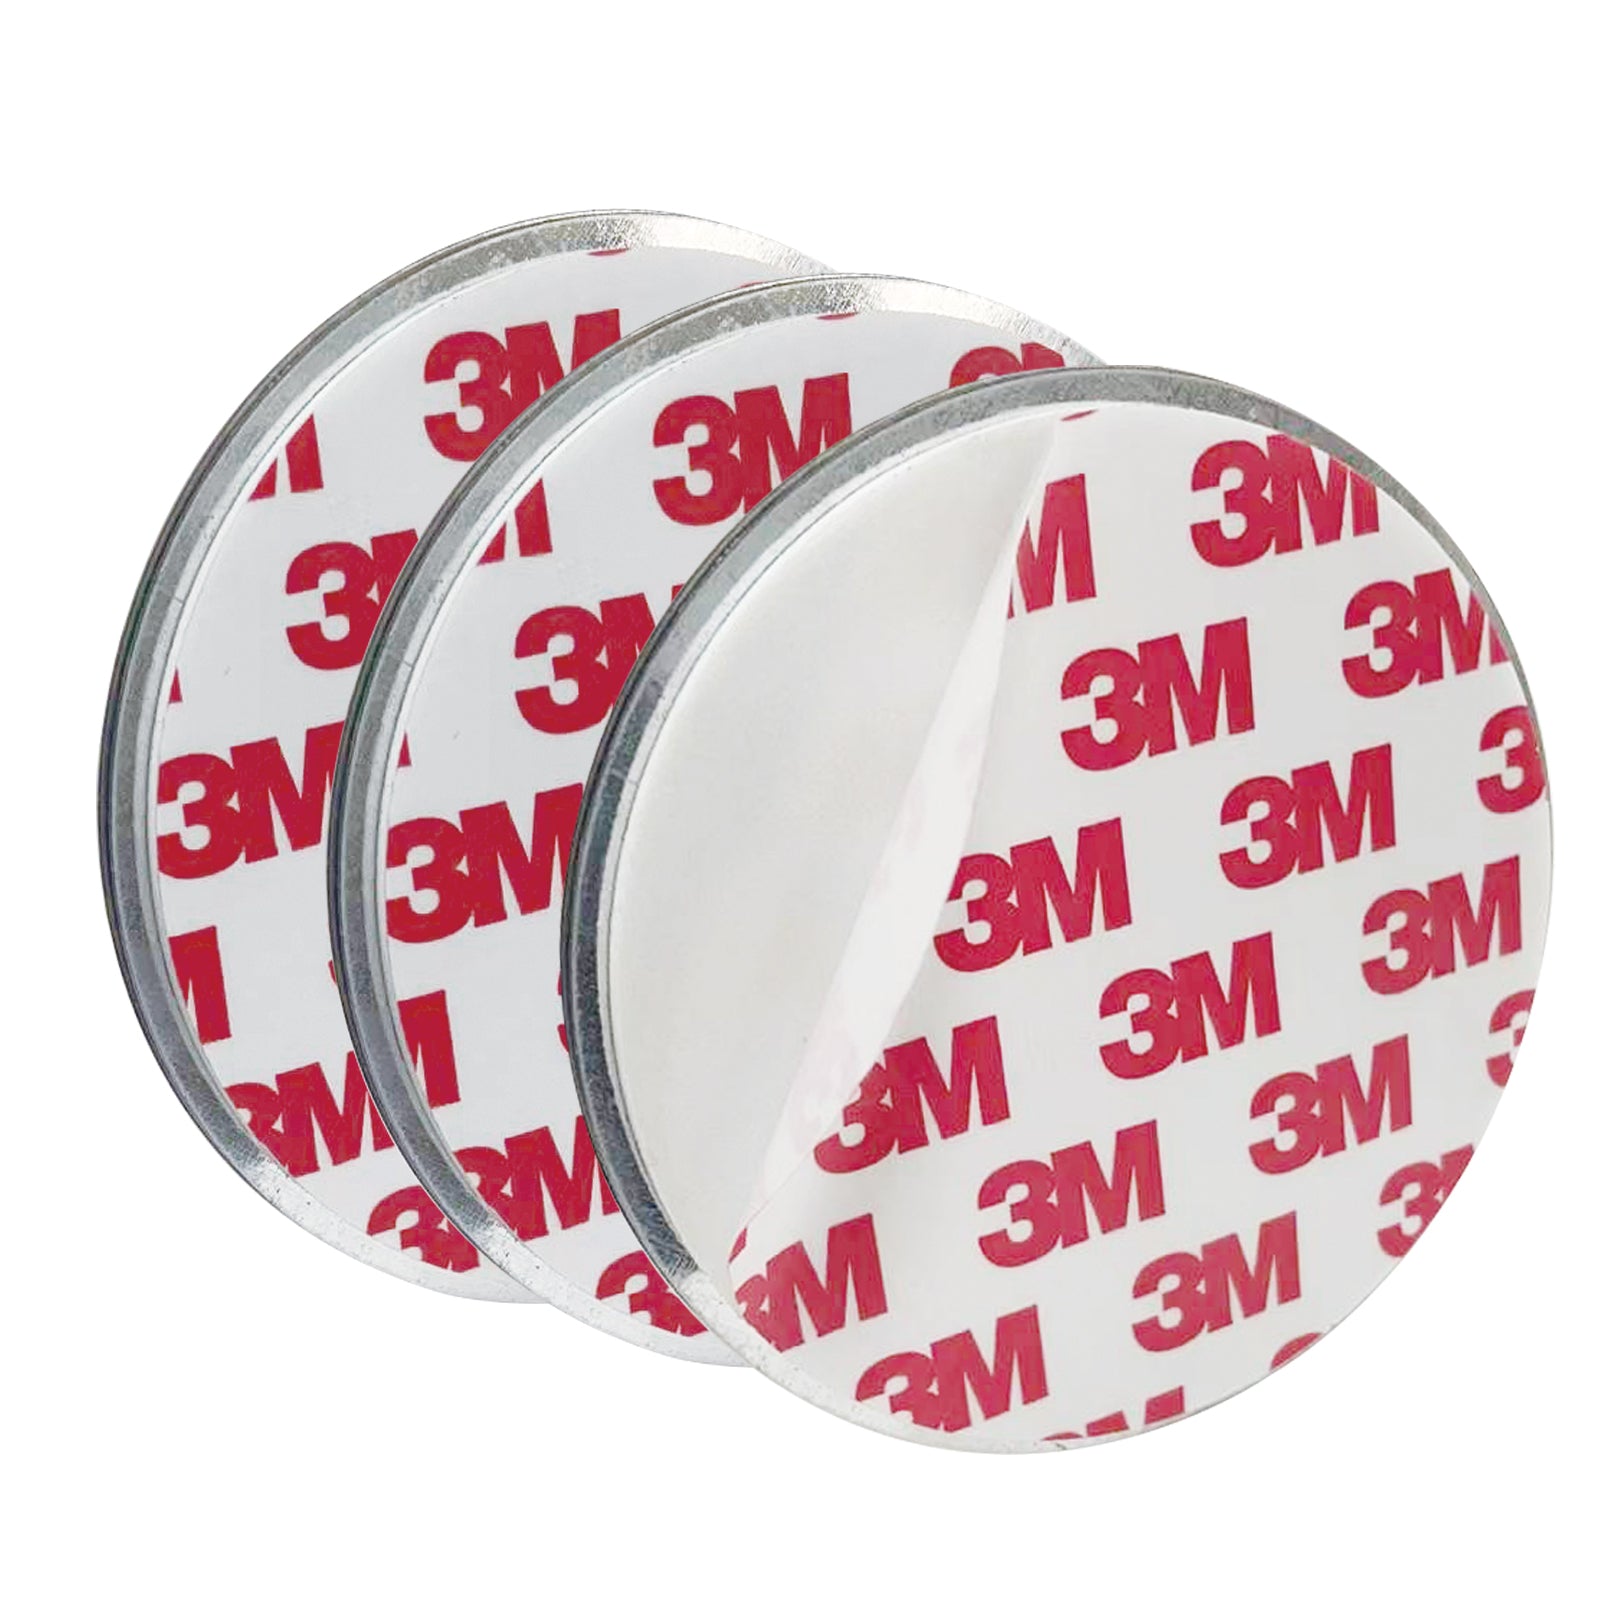 DVM-HA30MR-3: Set of 3 Heat detectors DVM-HA30MR, fixed 10-year battery, wireless interconnection, magnetic mounting